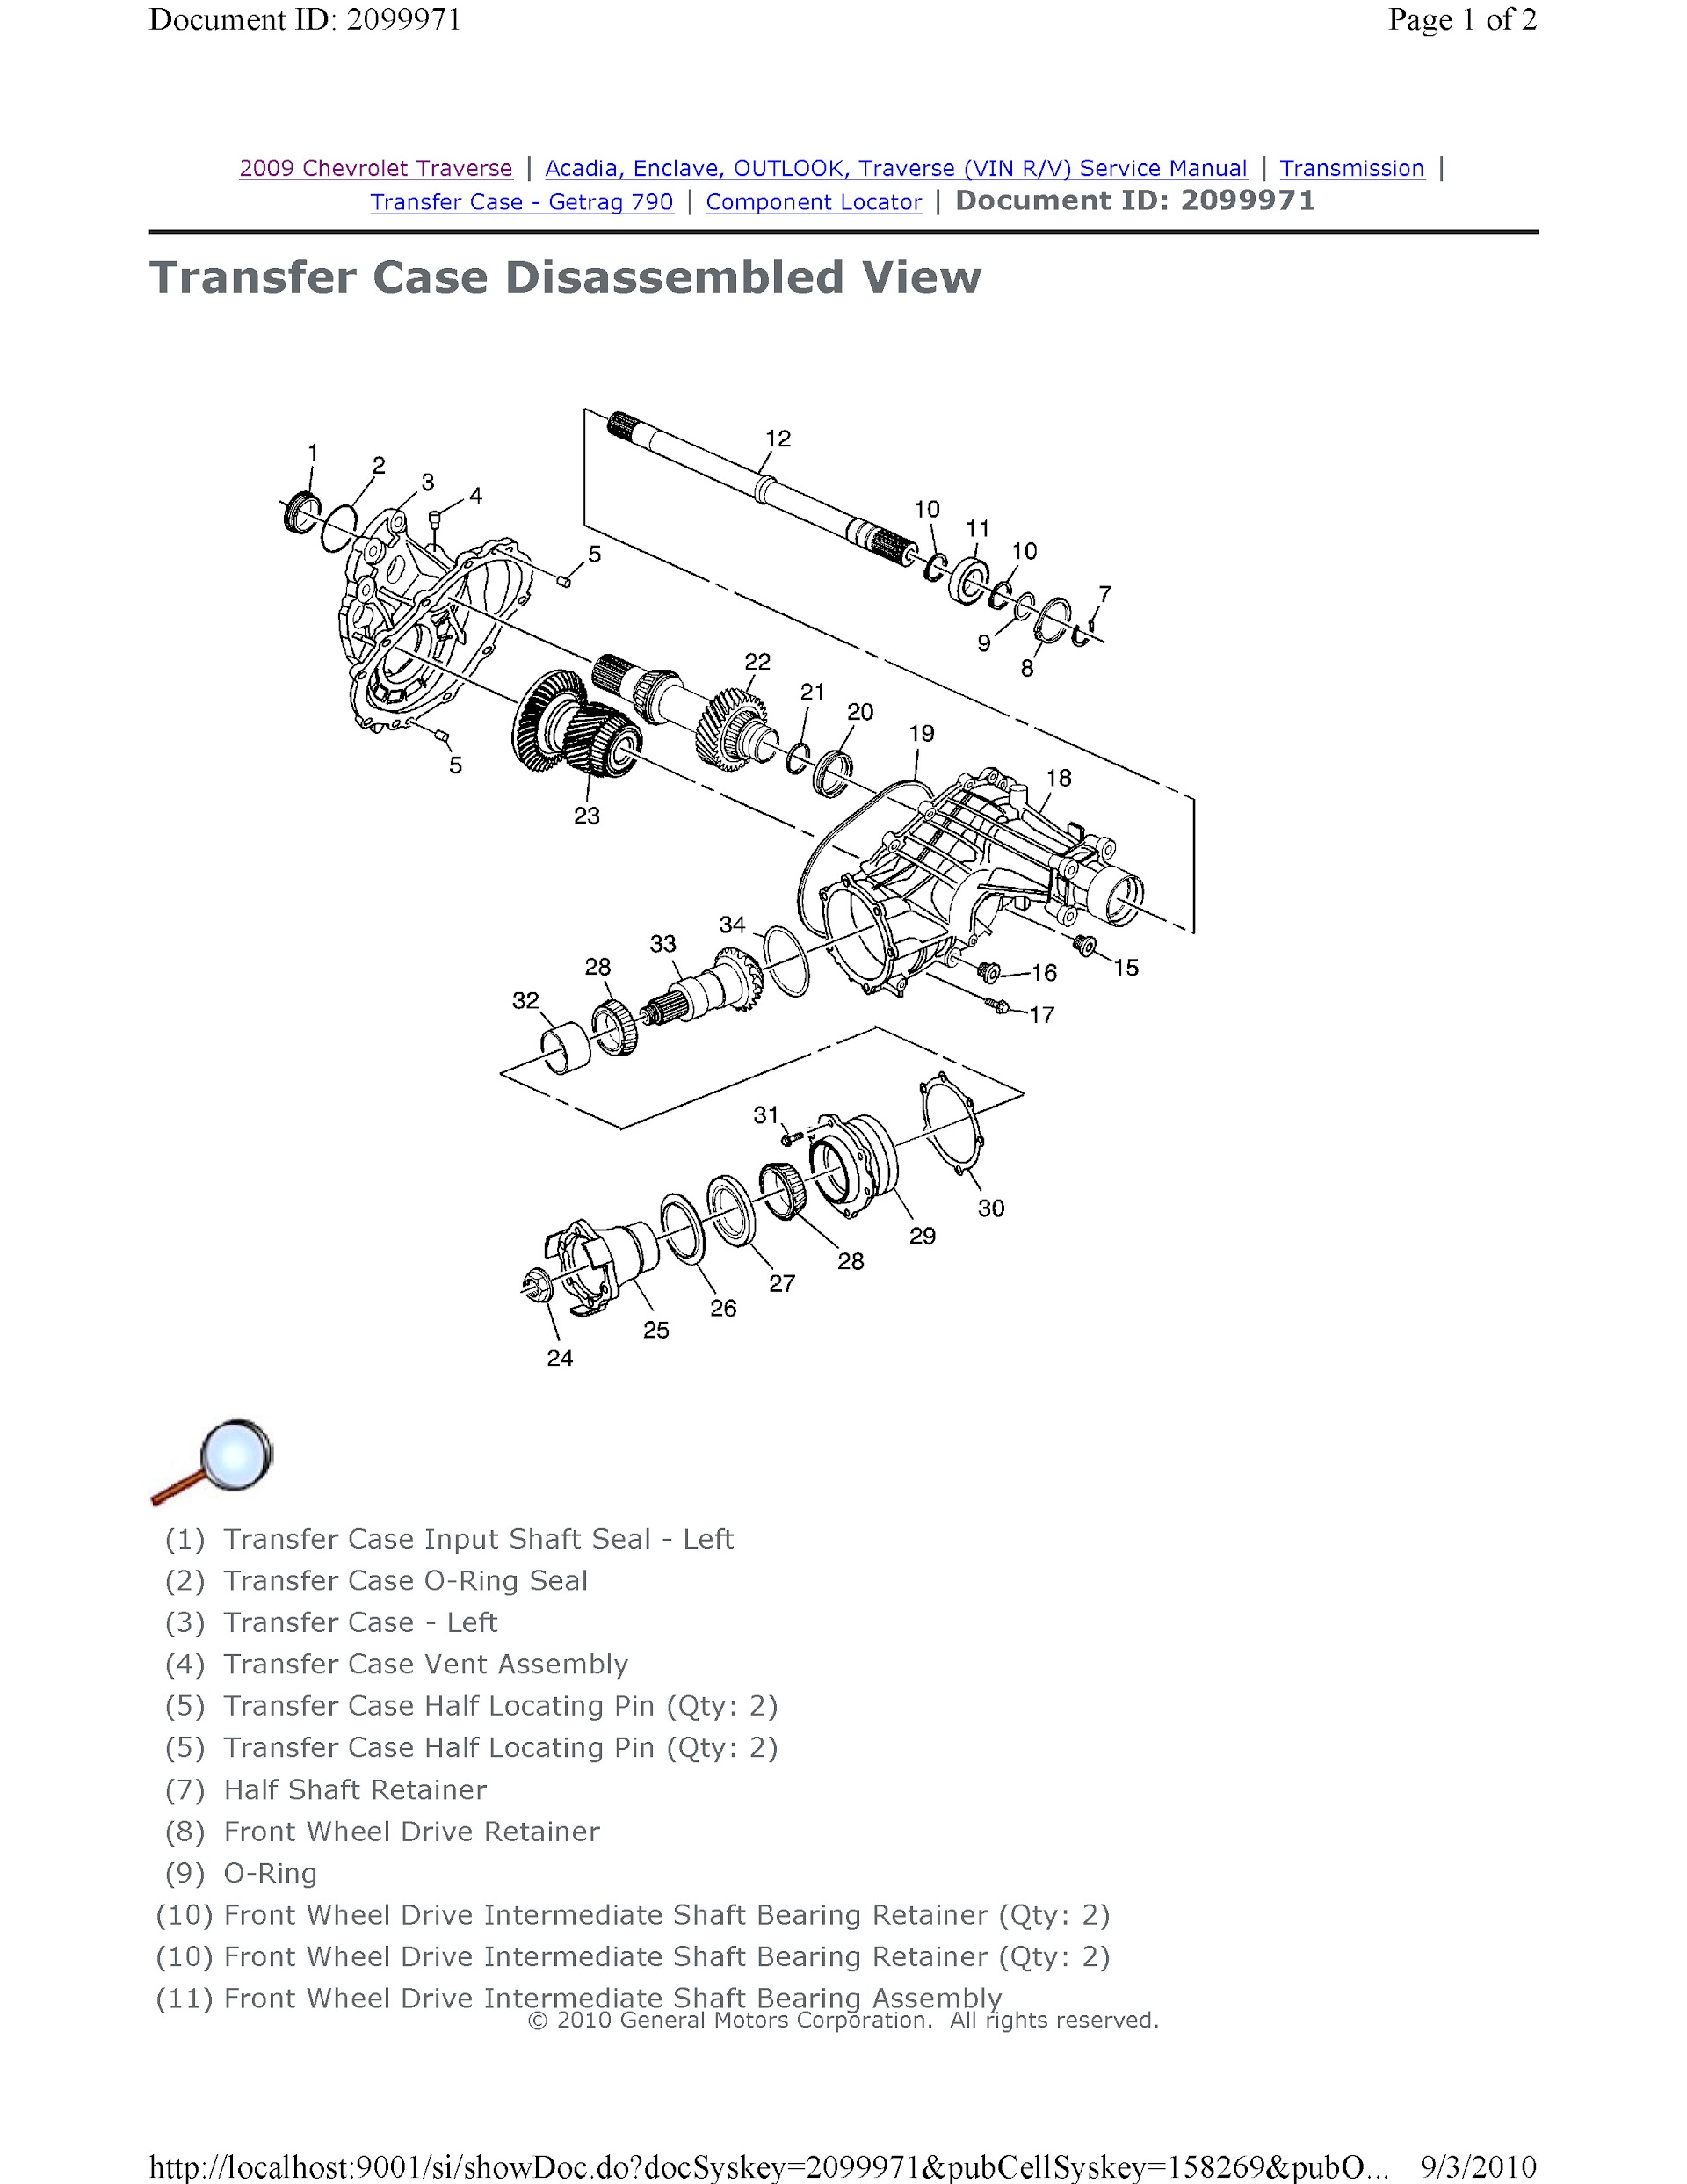 CONTENTS: 2009-2010 Chevrolet Traverse Repair Manual, transfer case disassmbled